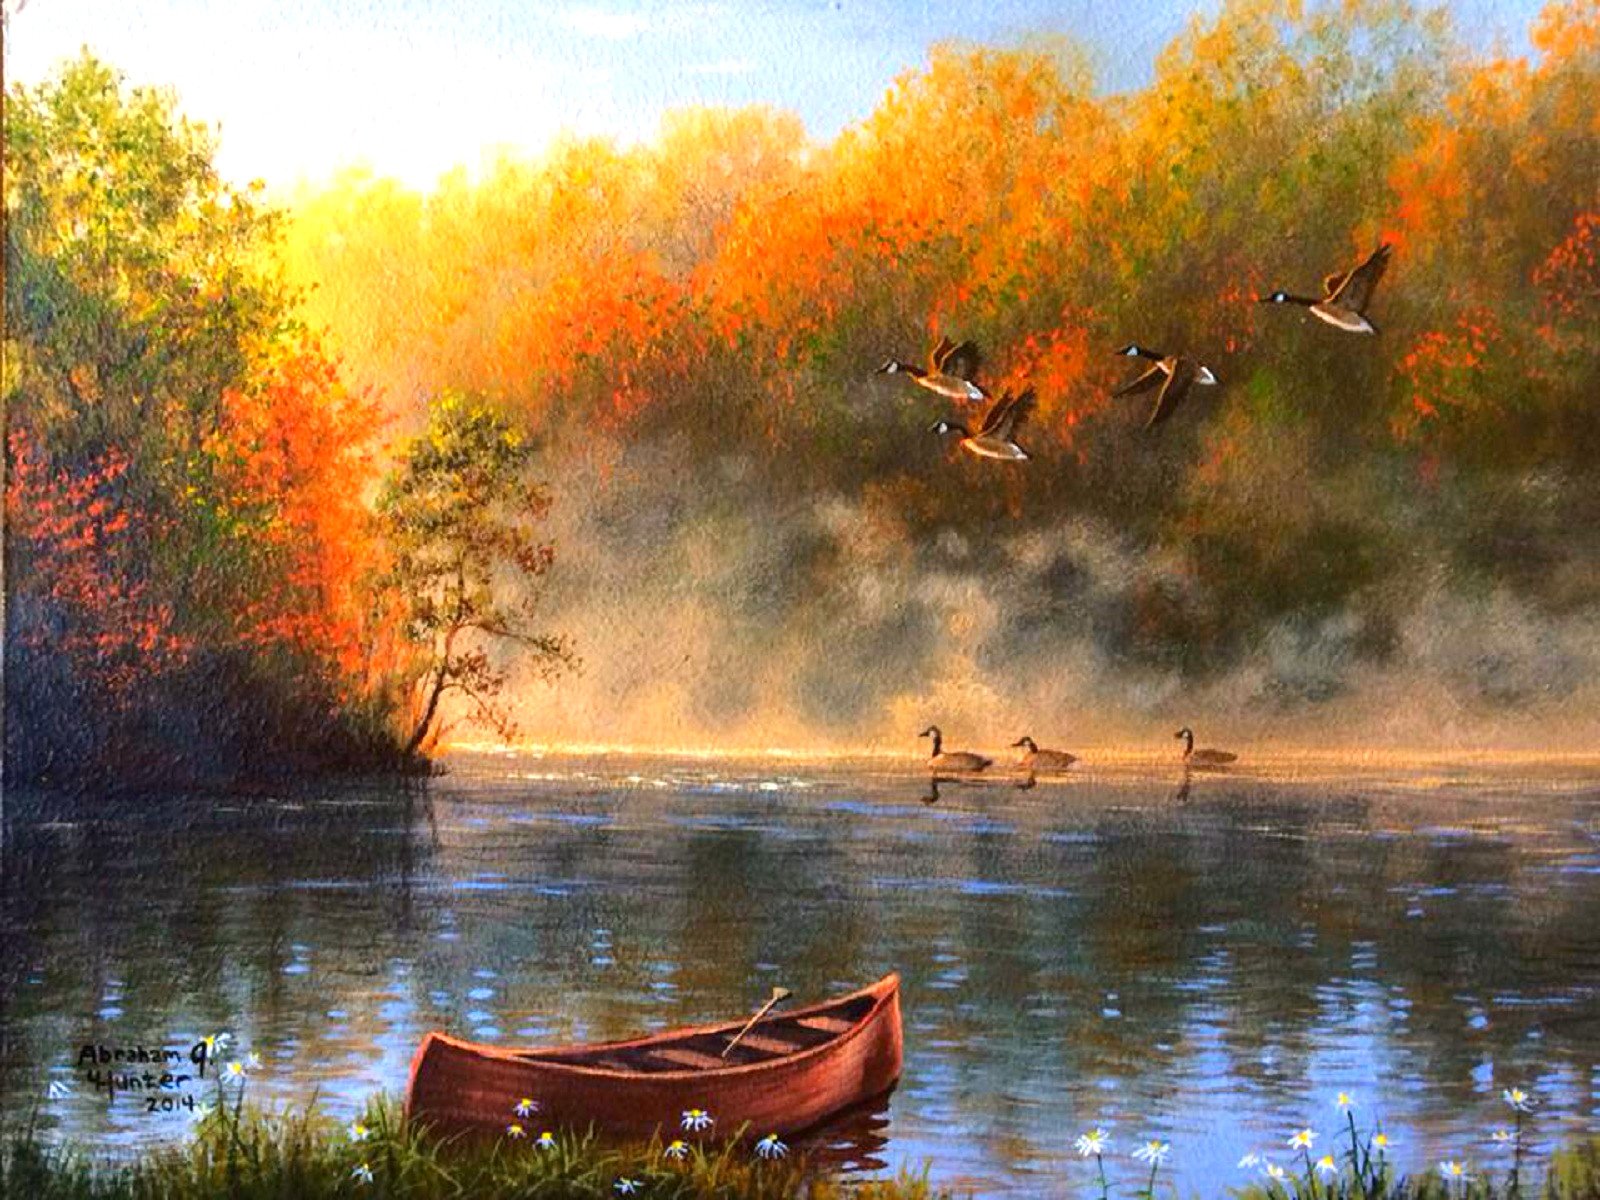 autumn, Fall, Landscape, Nature, Tree, Forest, Leaf, Leaves, Rustic, Artwork, Duck, Boat, Sumrise, River, Lake, Mood Wallpaper